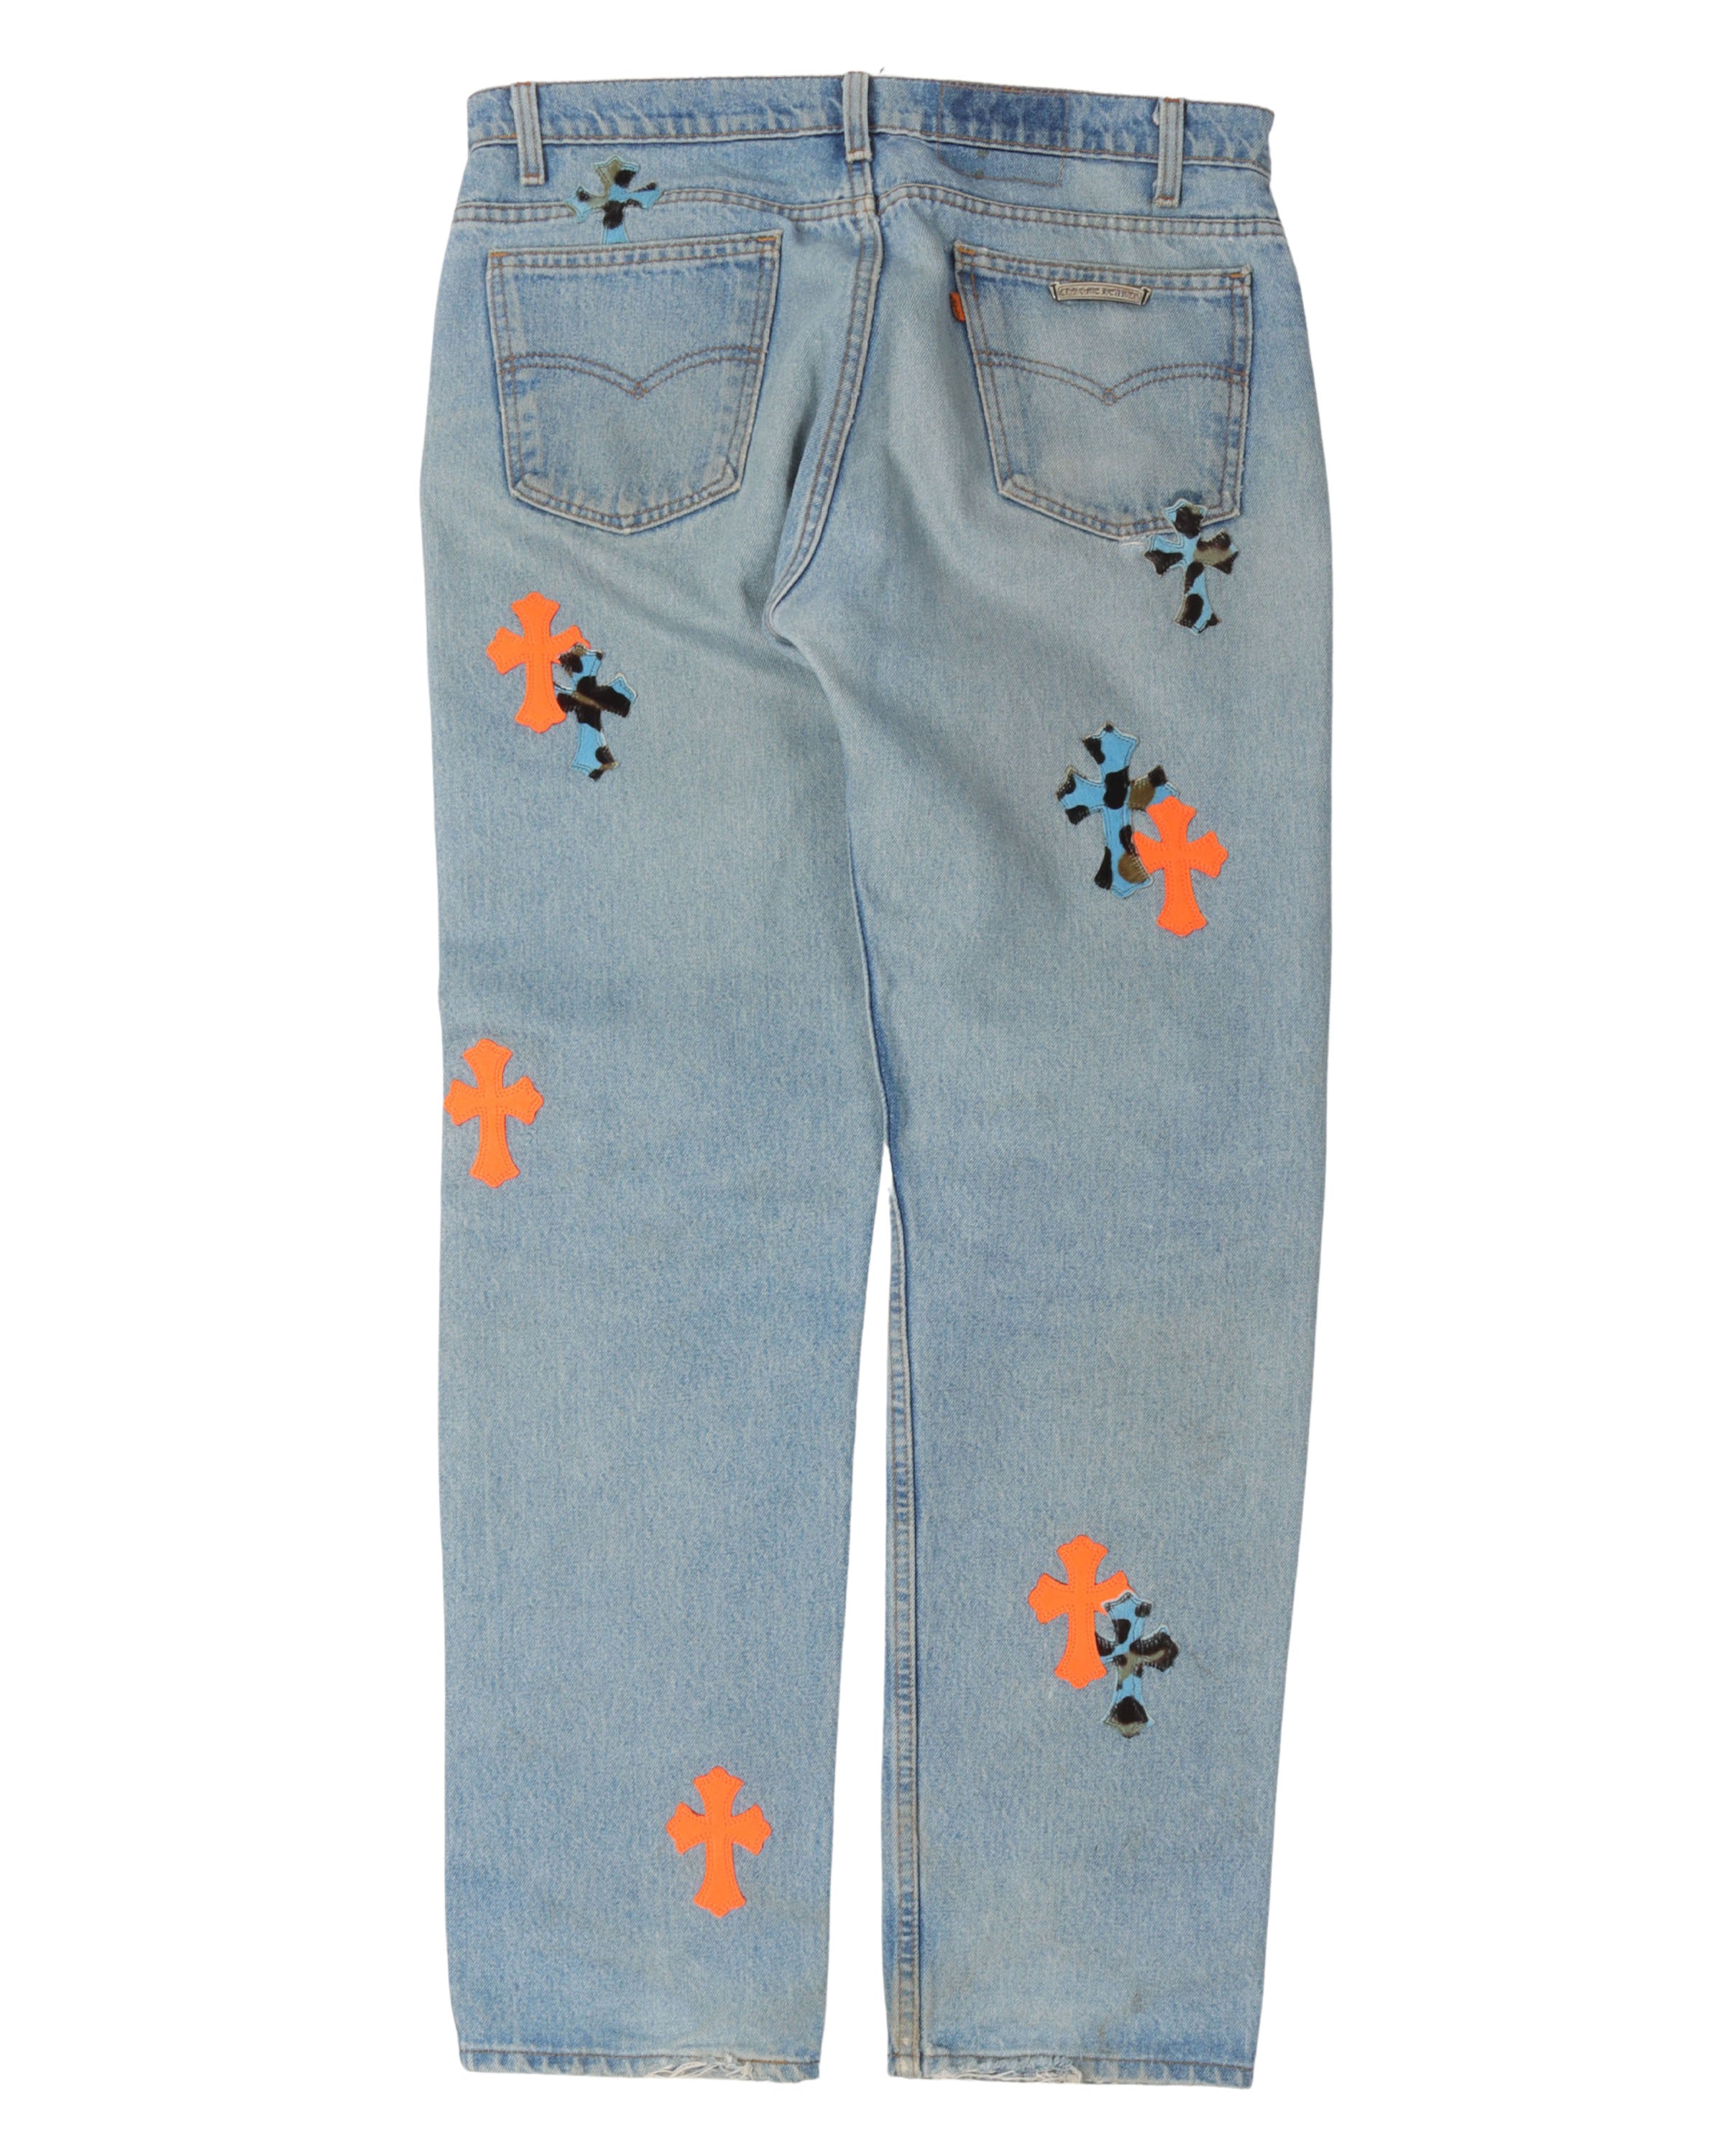 Levi's St. Barth's Cross Patch Jeans